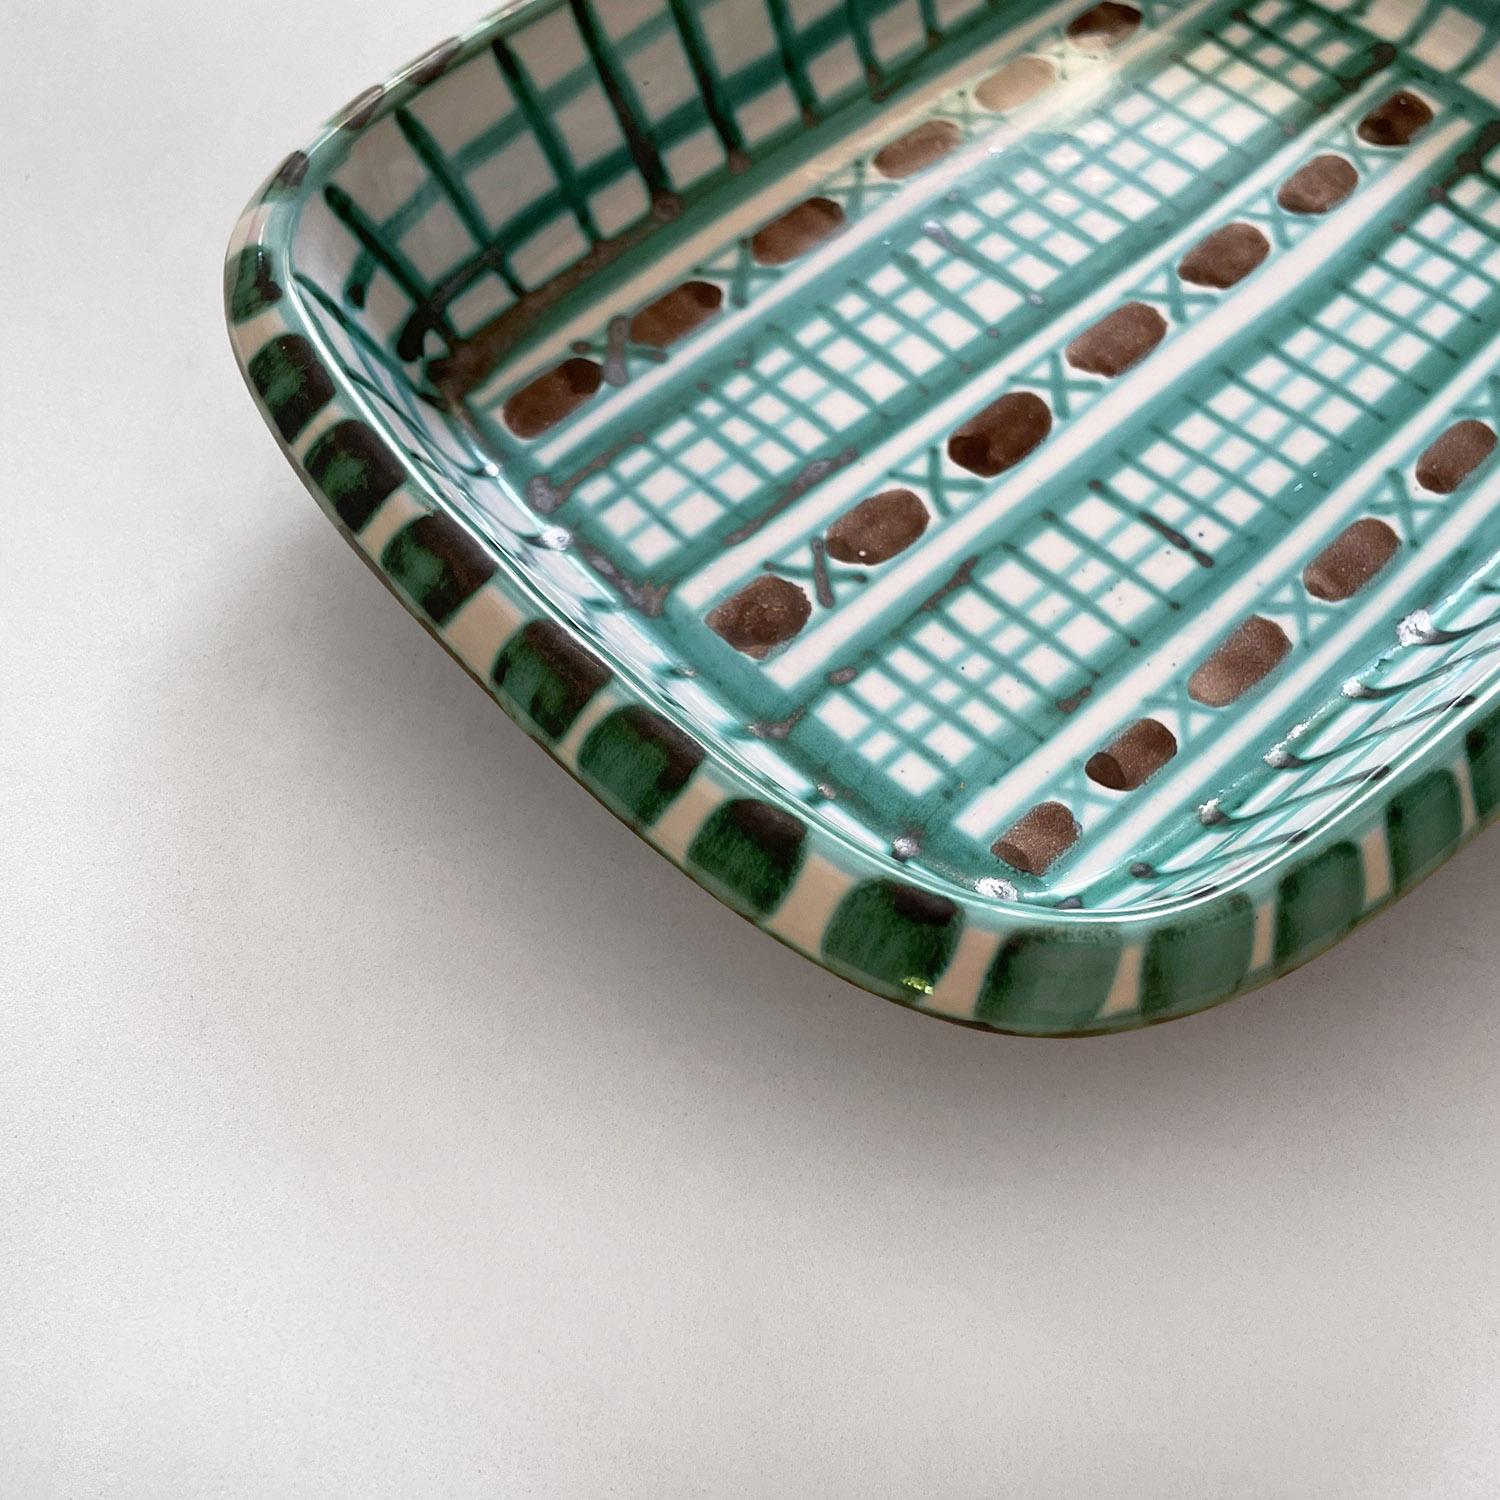 Robert Picault French ceramic tray
France, circa 1950’s 
Vibrant pattern, color, and design
Small flea bite to the under side
Patina from age and use
Marked identification
Additional Robert Picault pieces are available, please see other